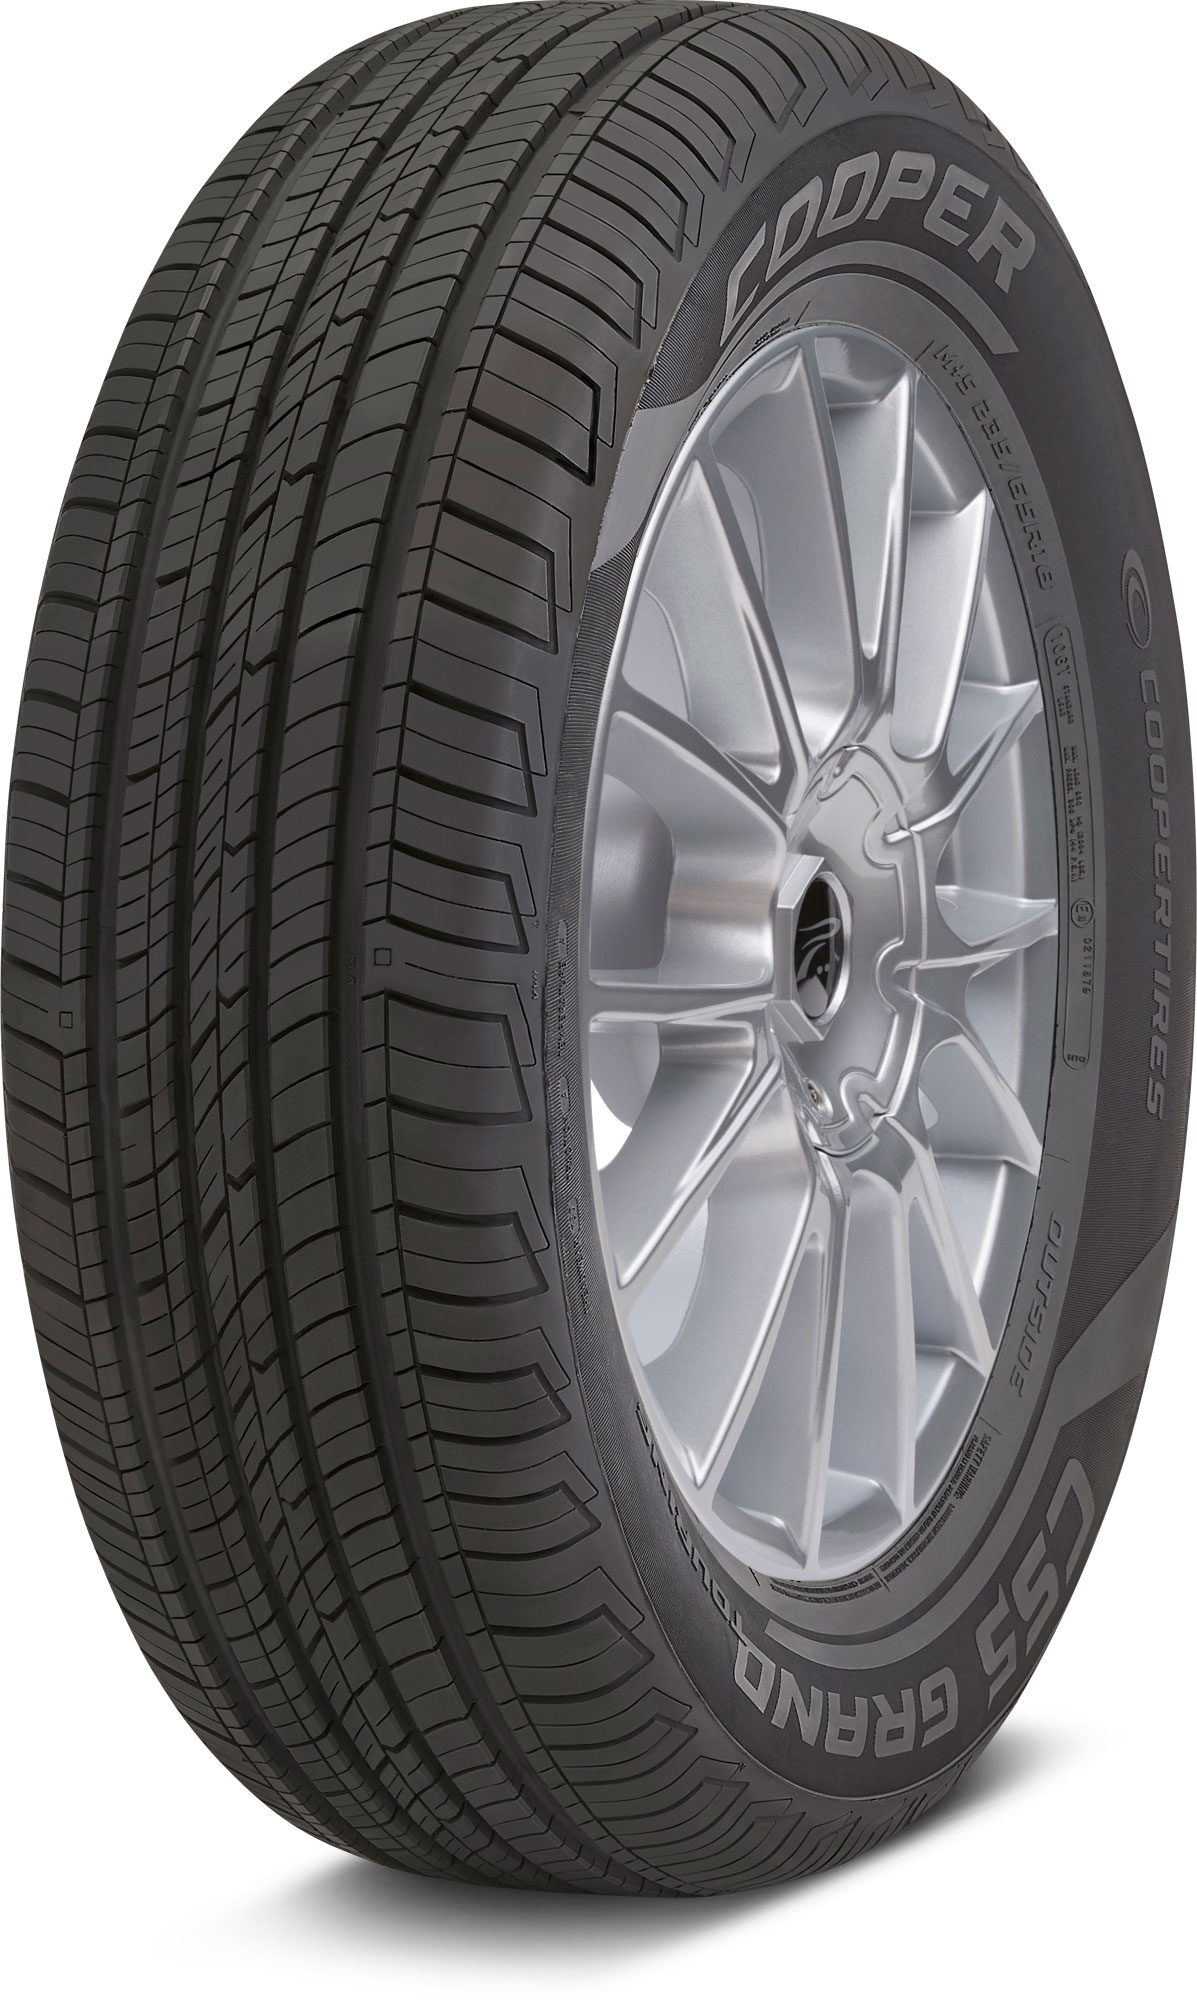 with-the-latest-design-concept-worldwide-shipping-c-cs5-g-tg-r-tire